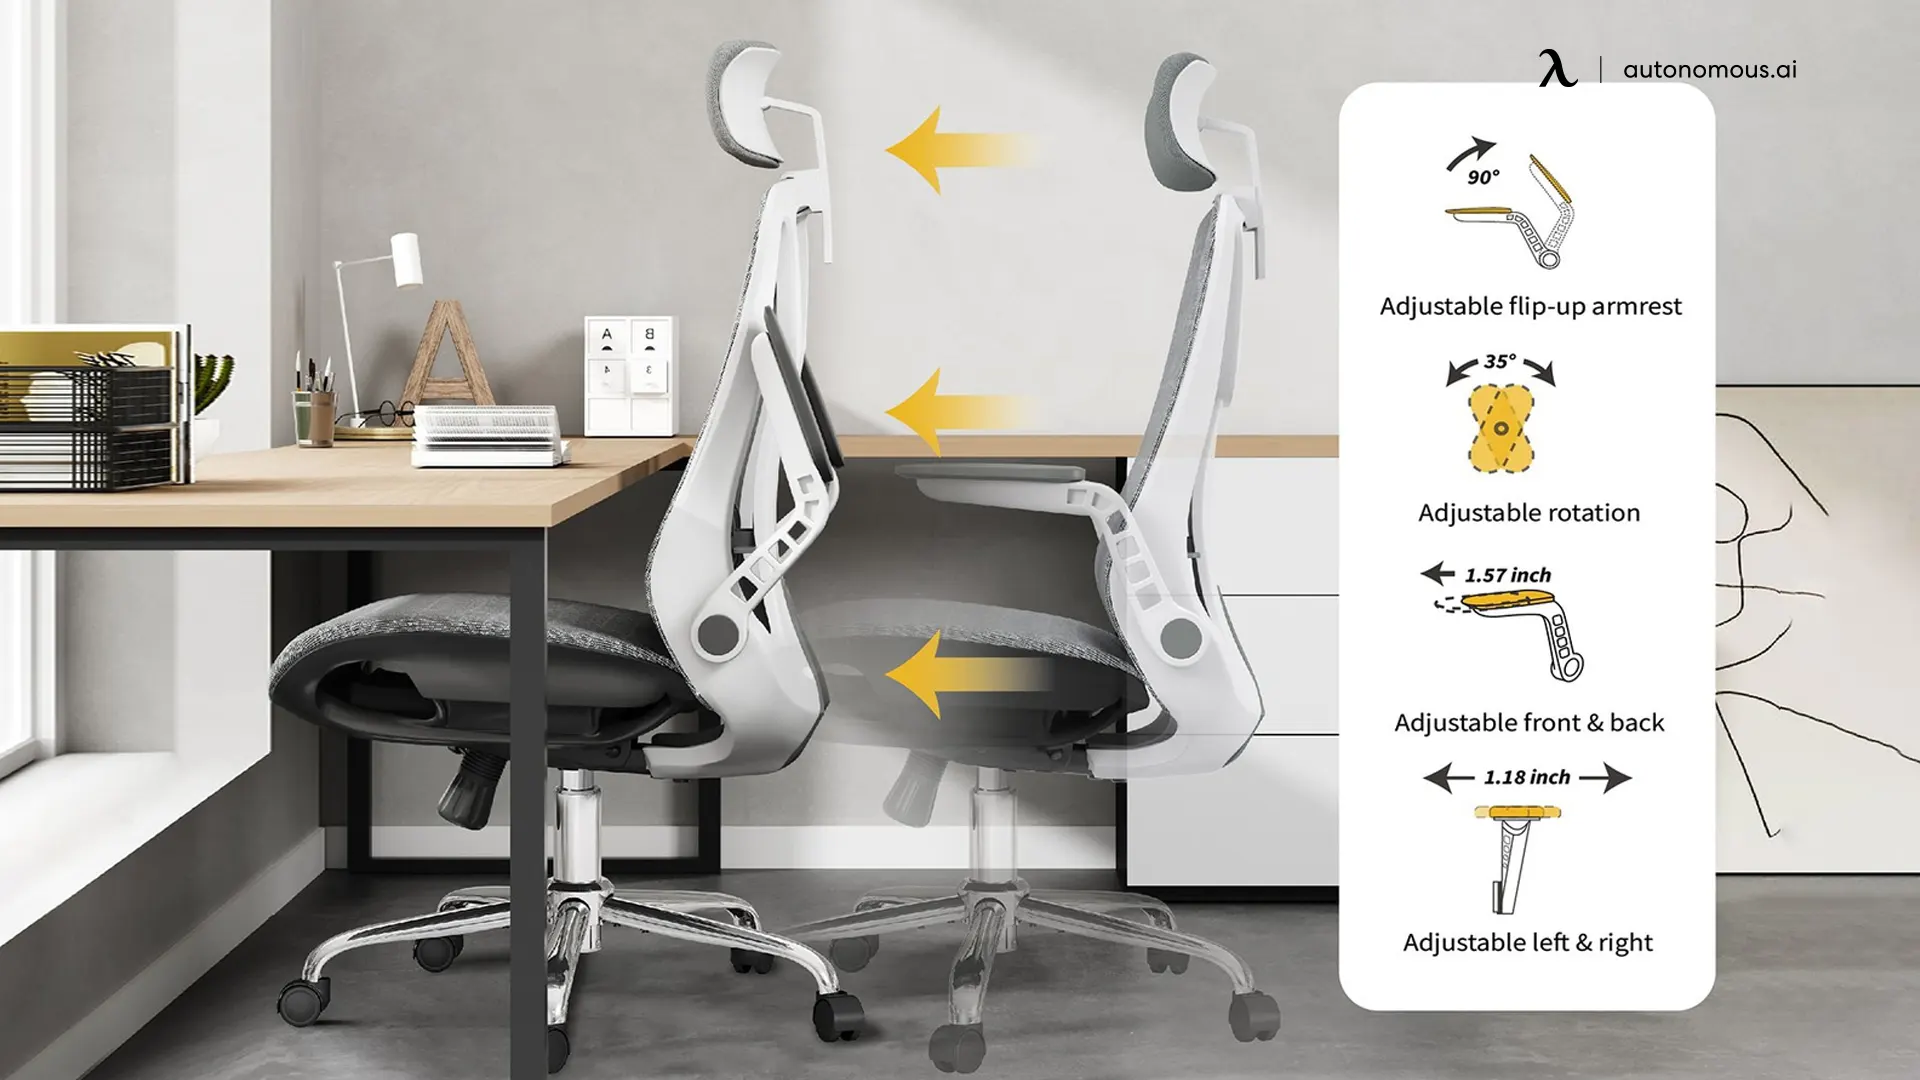 What to Consider When Buying an Office Chair?